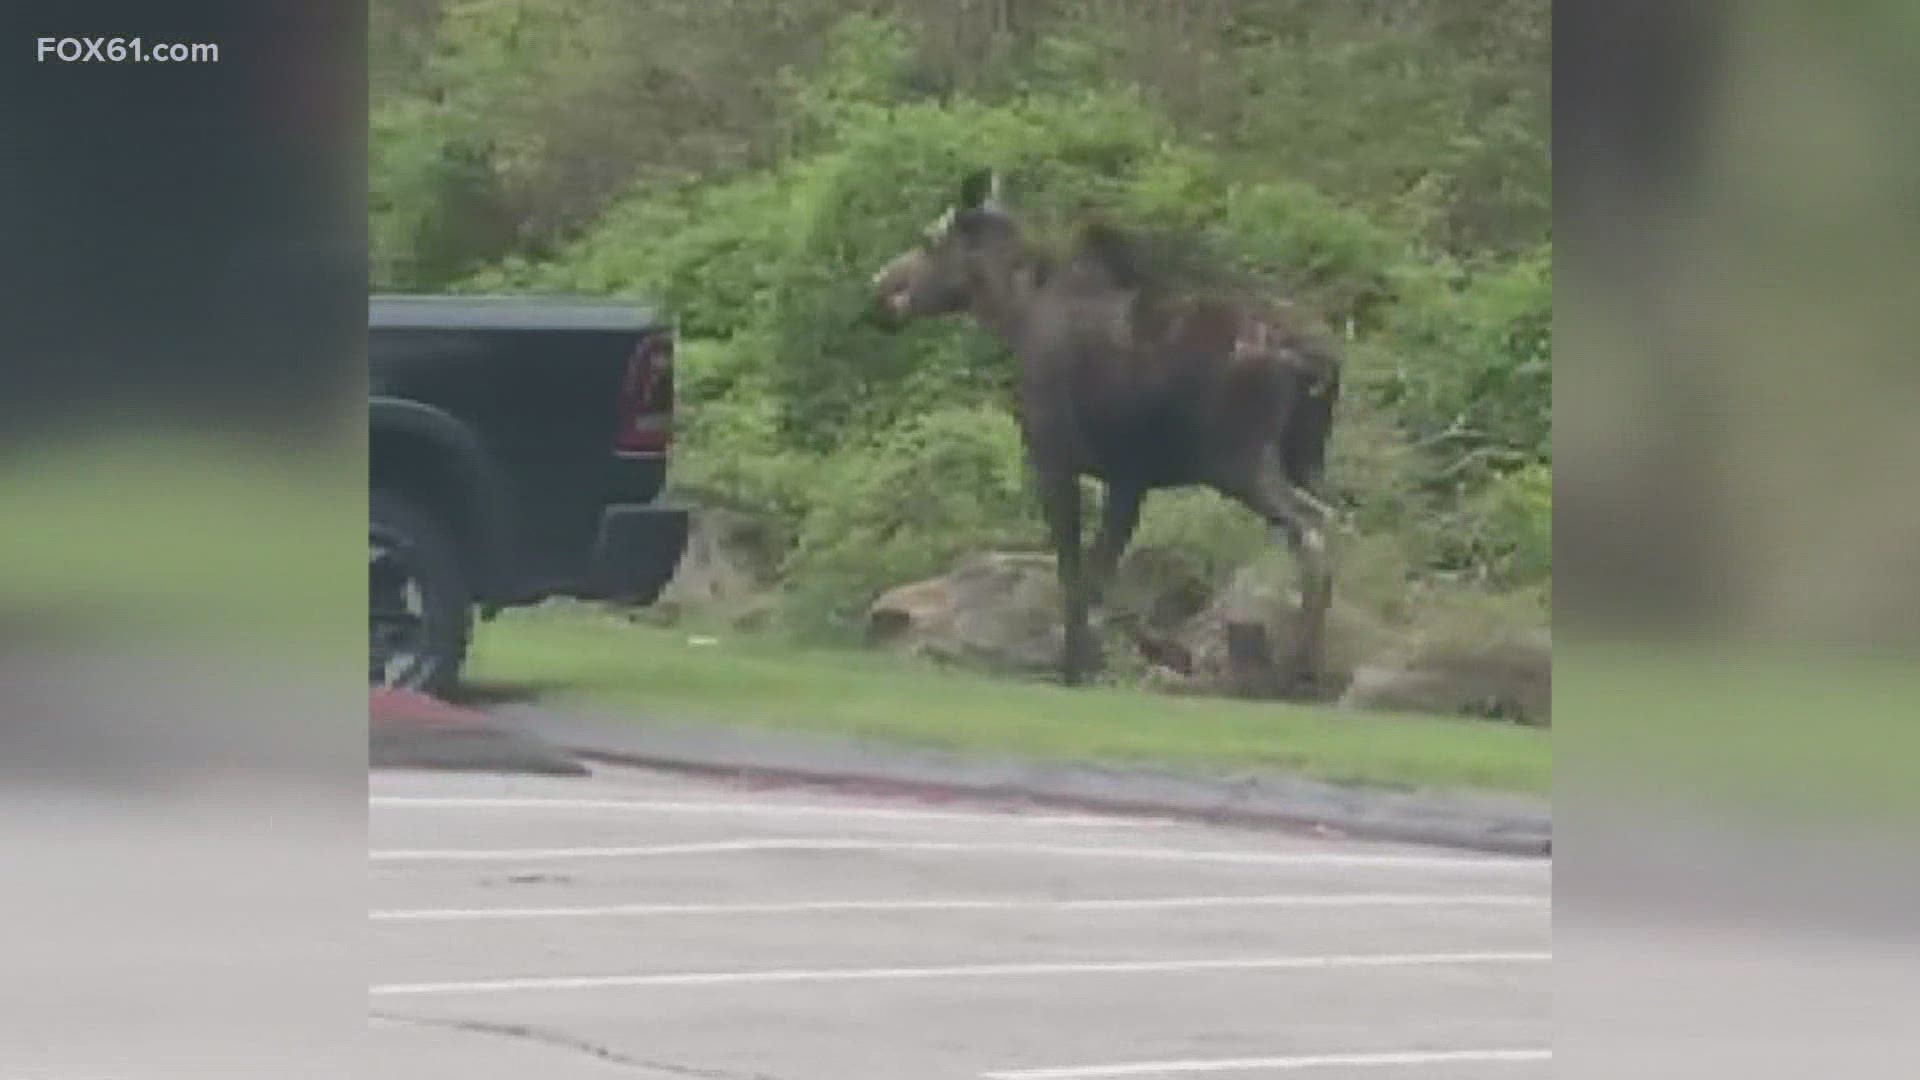 The moose was spotted by Hops 44 in Storrs, captured on video by Nancy Mckenney, owner of Hops 44.